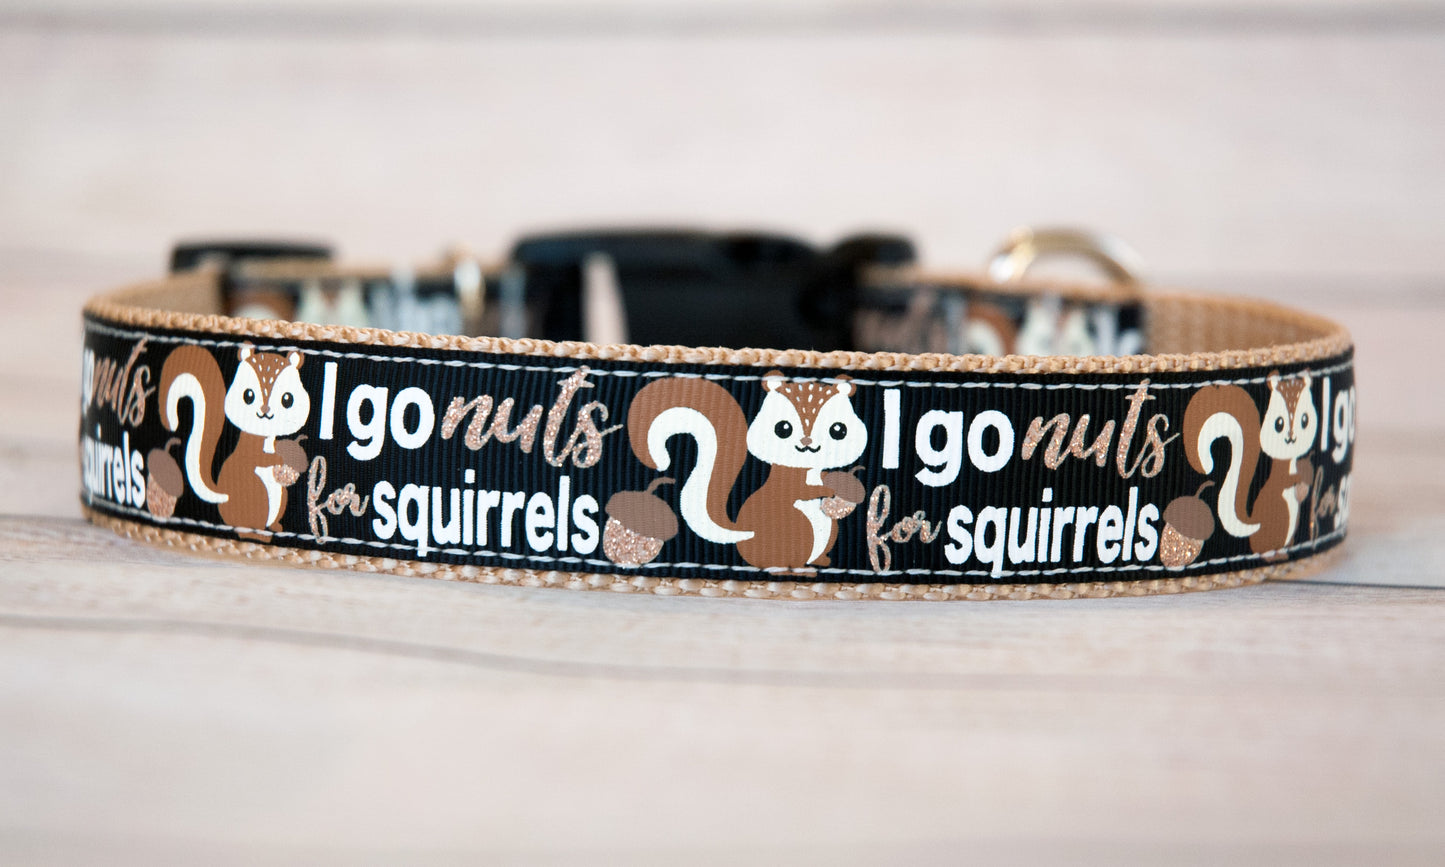 I go nuts for squirrels dog collar and/or leash(black). 3/4" wide